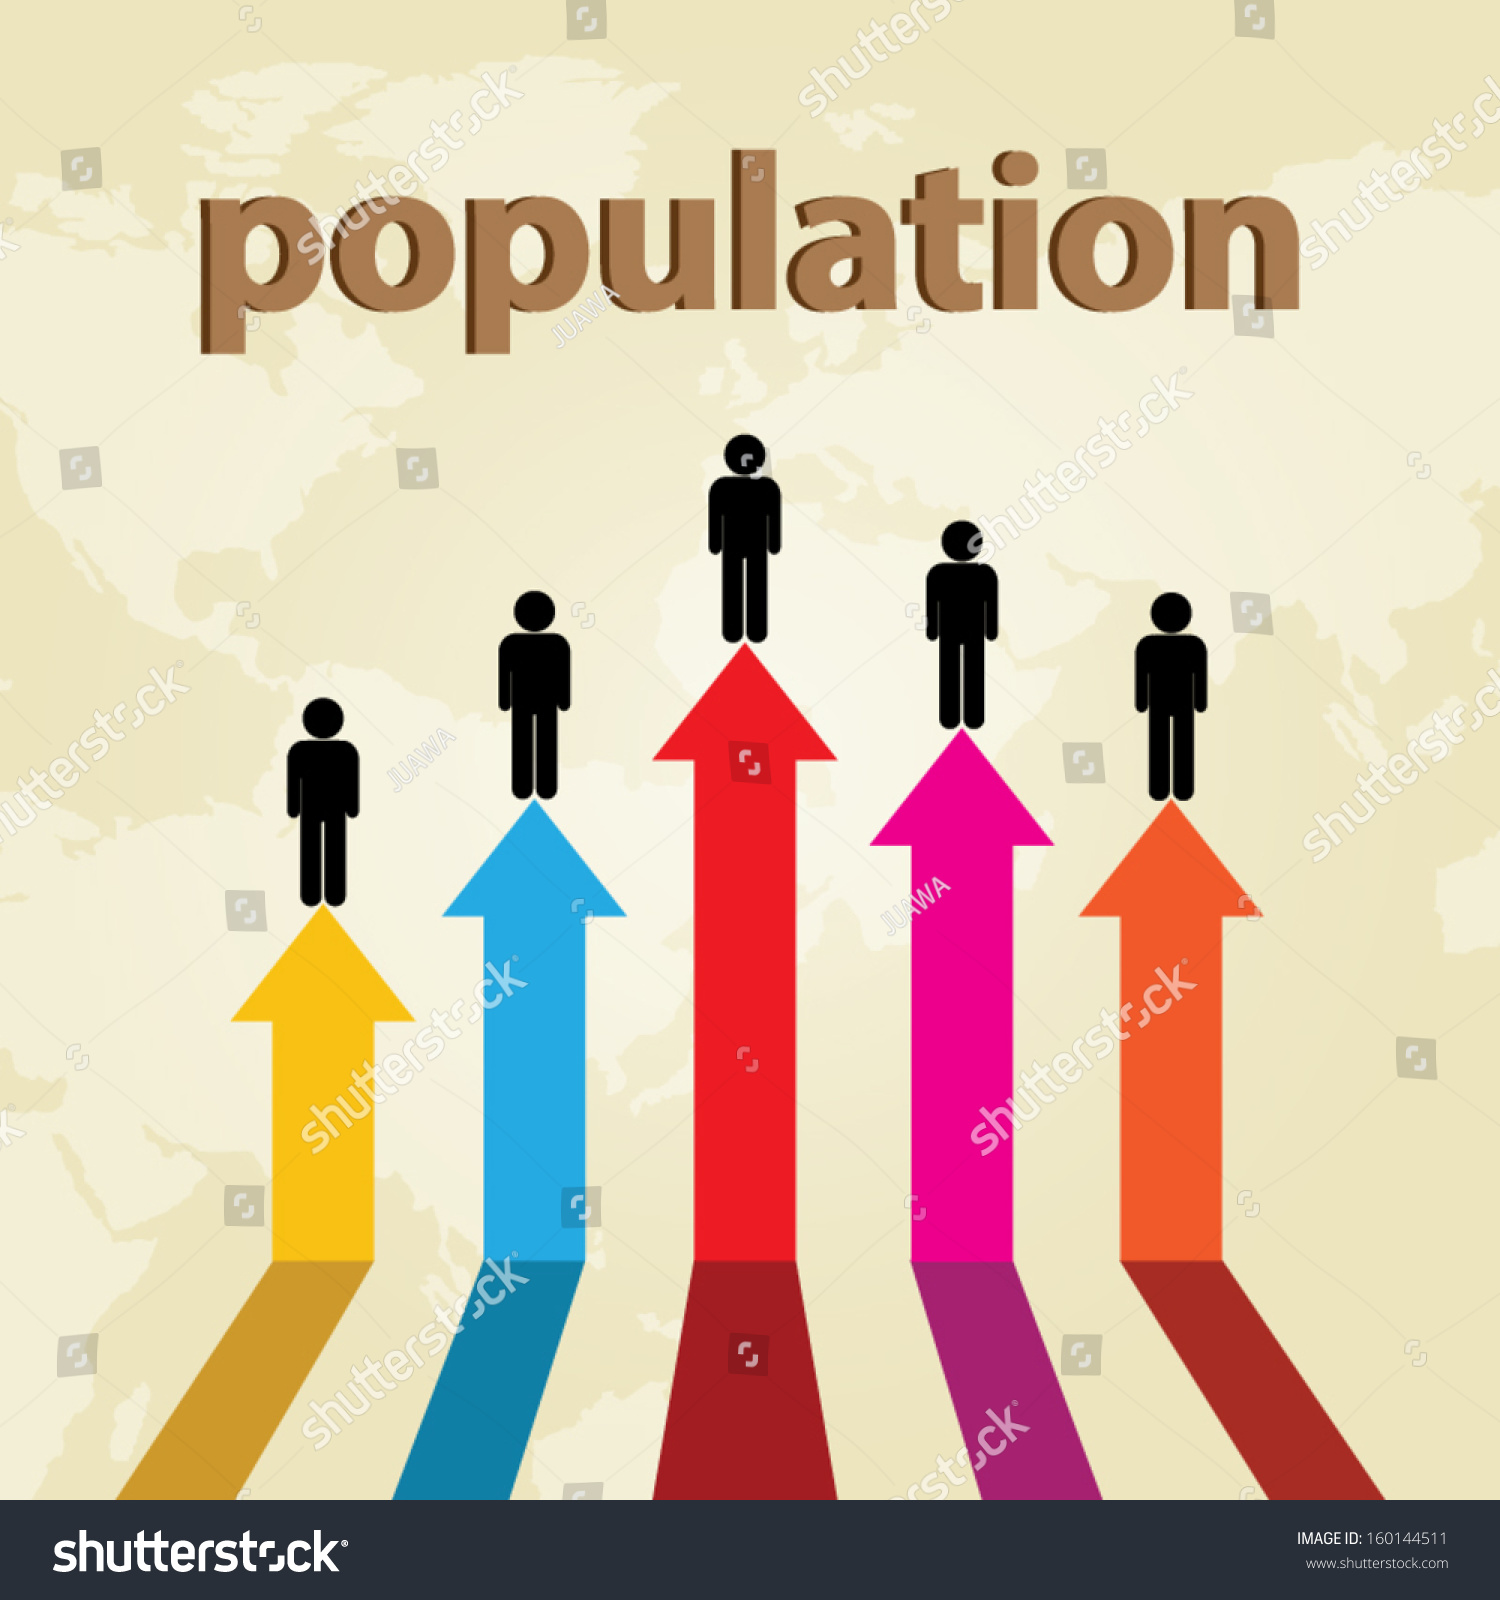 SVG of population growth and graph - vector. svg